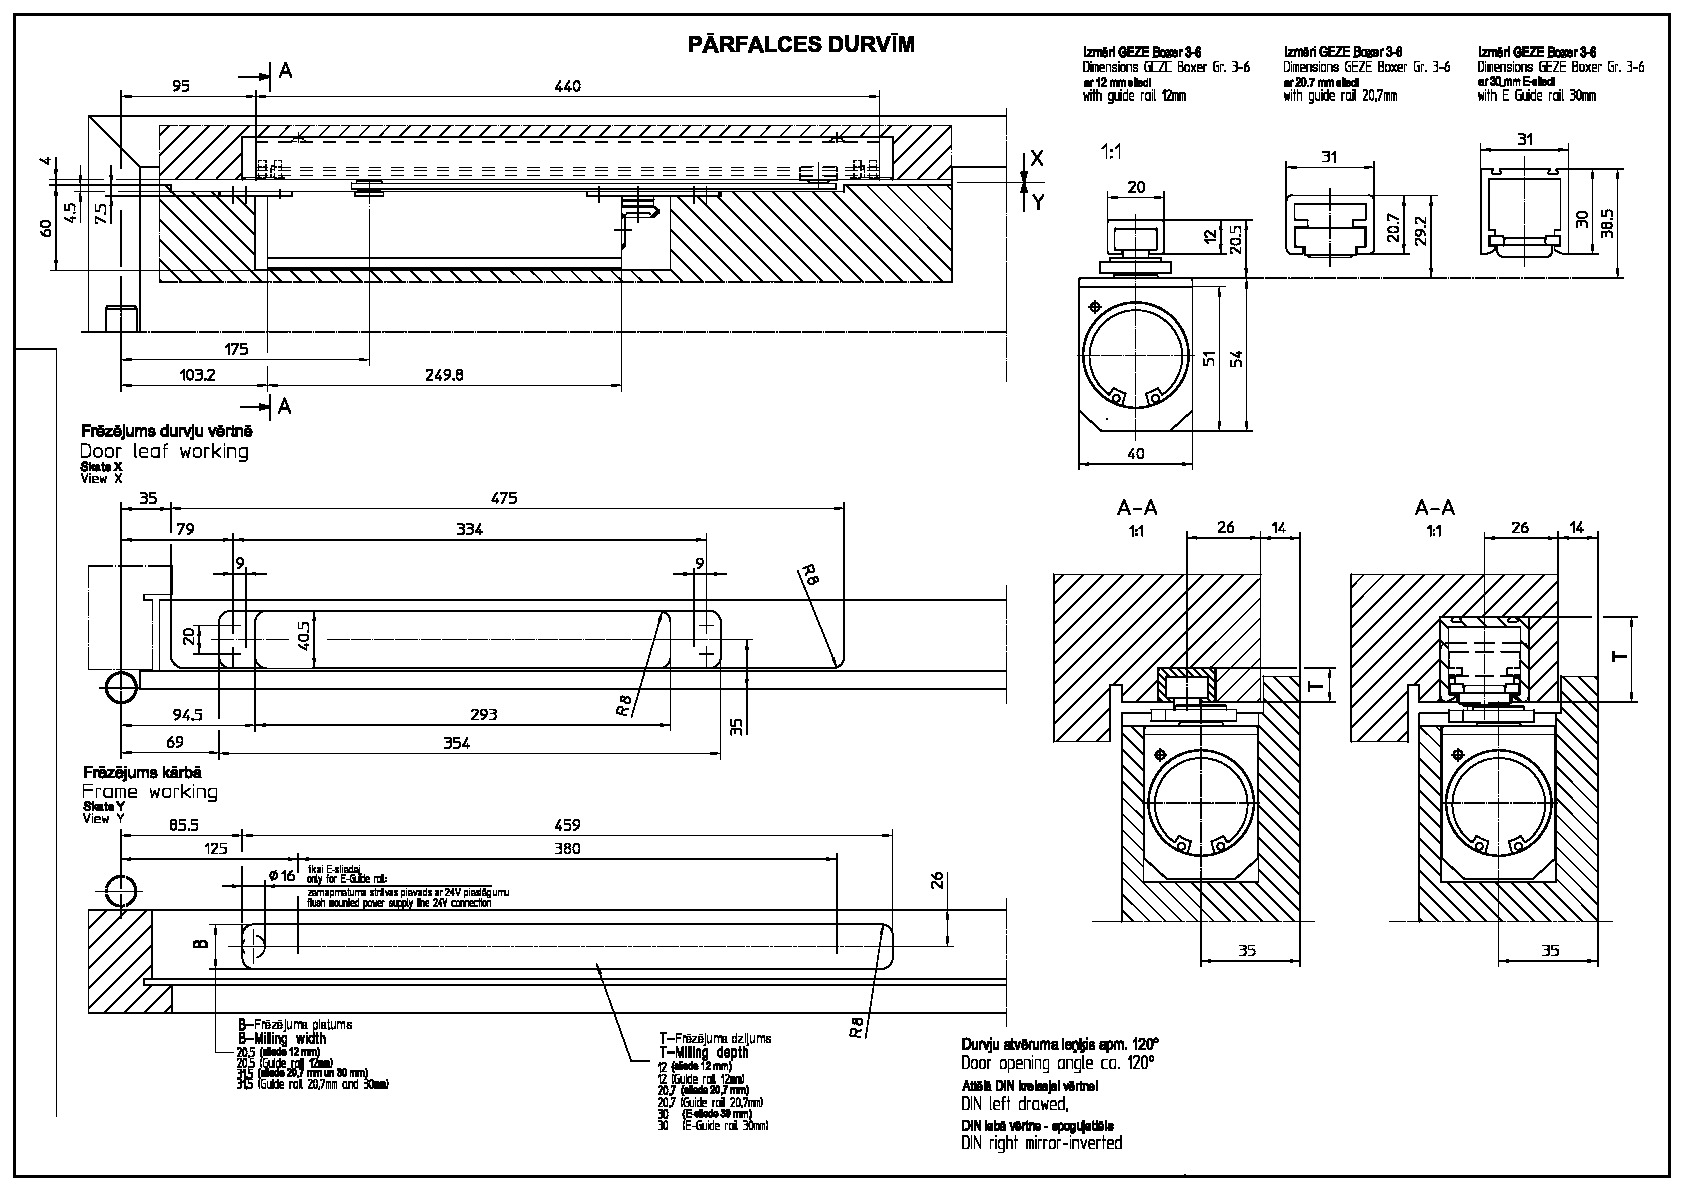 Assembly details for the concealed closer BOXER 3-6 in rebated wooden doors